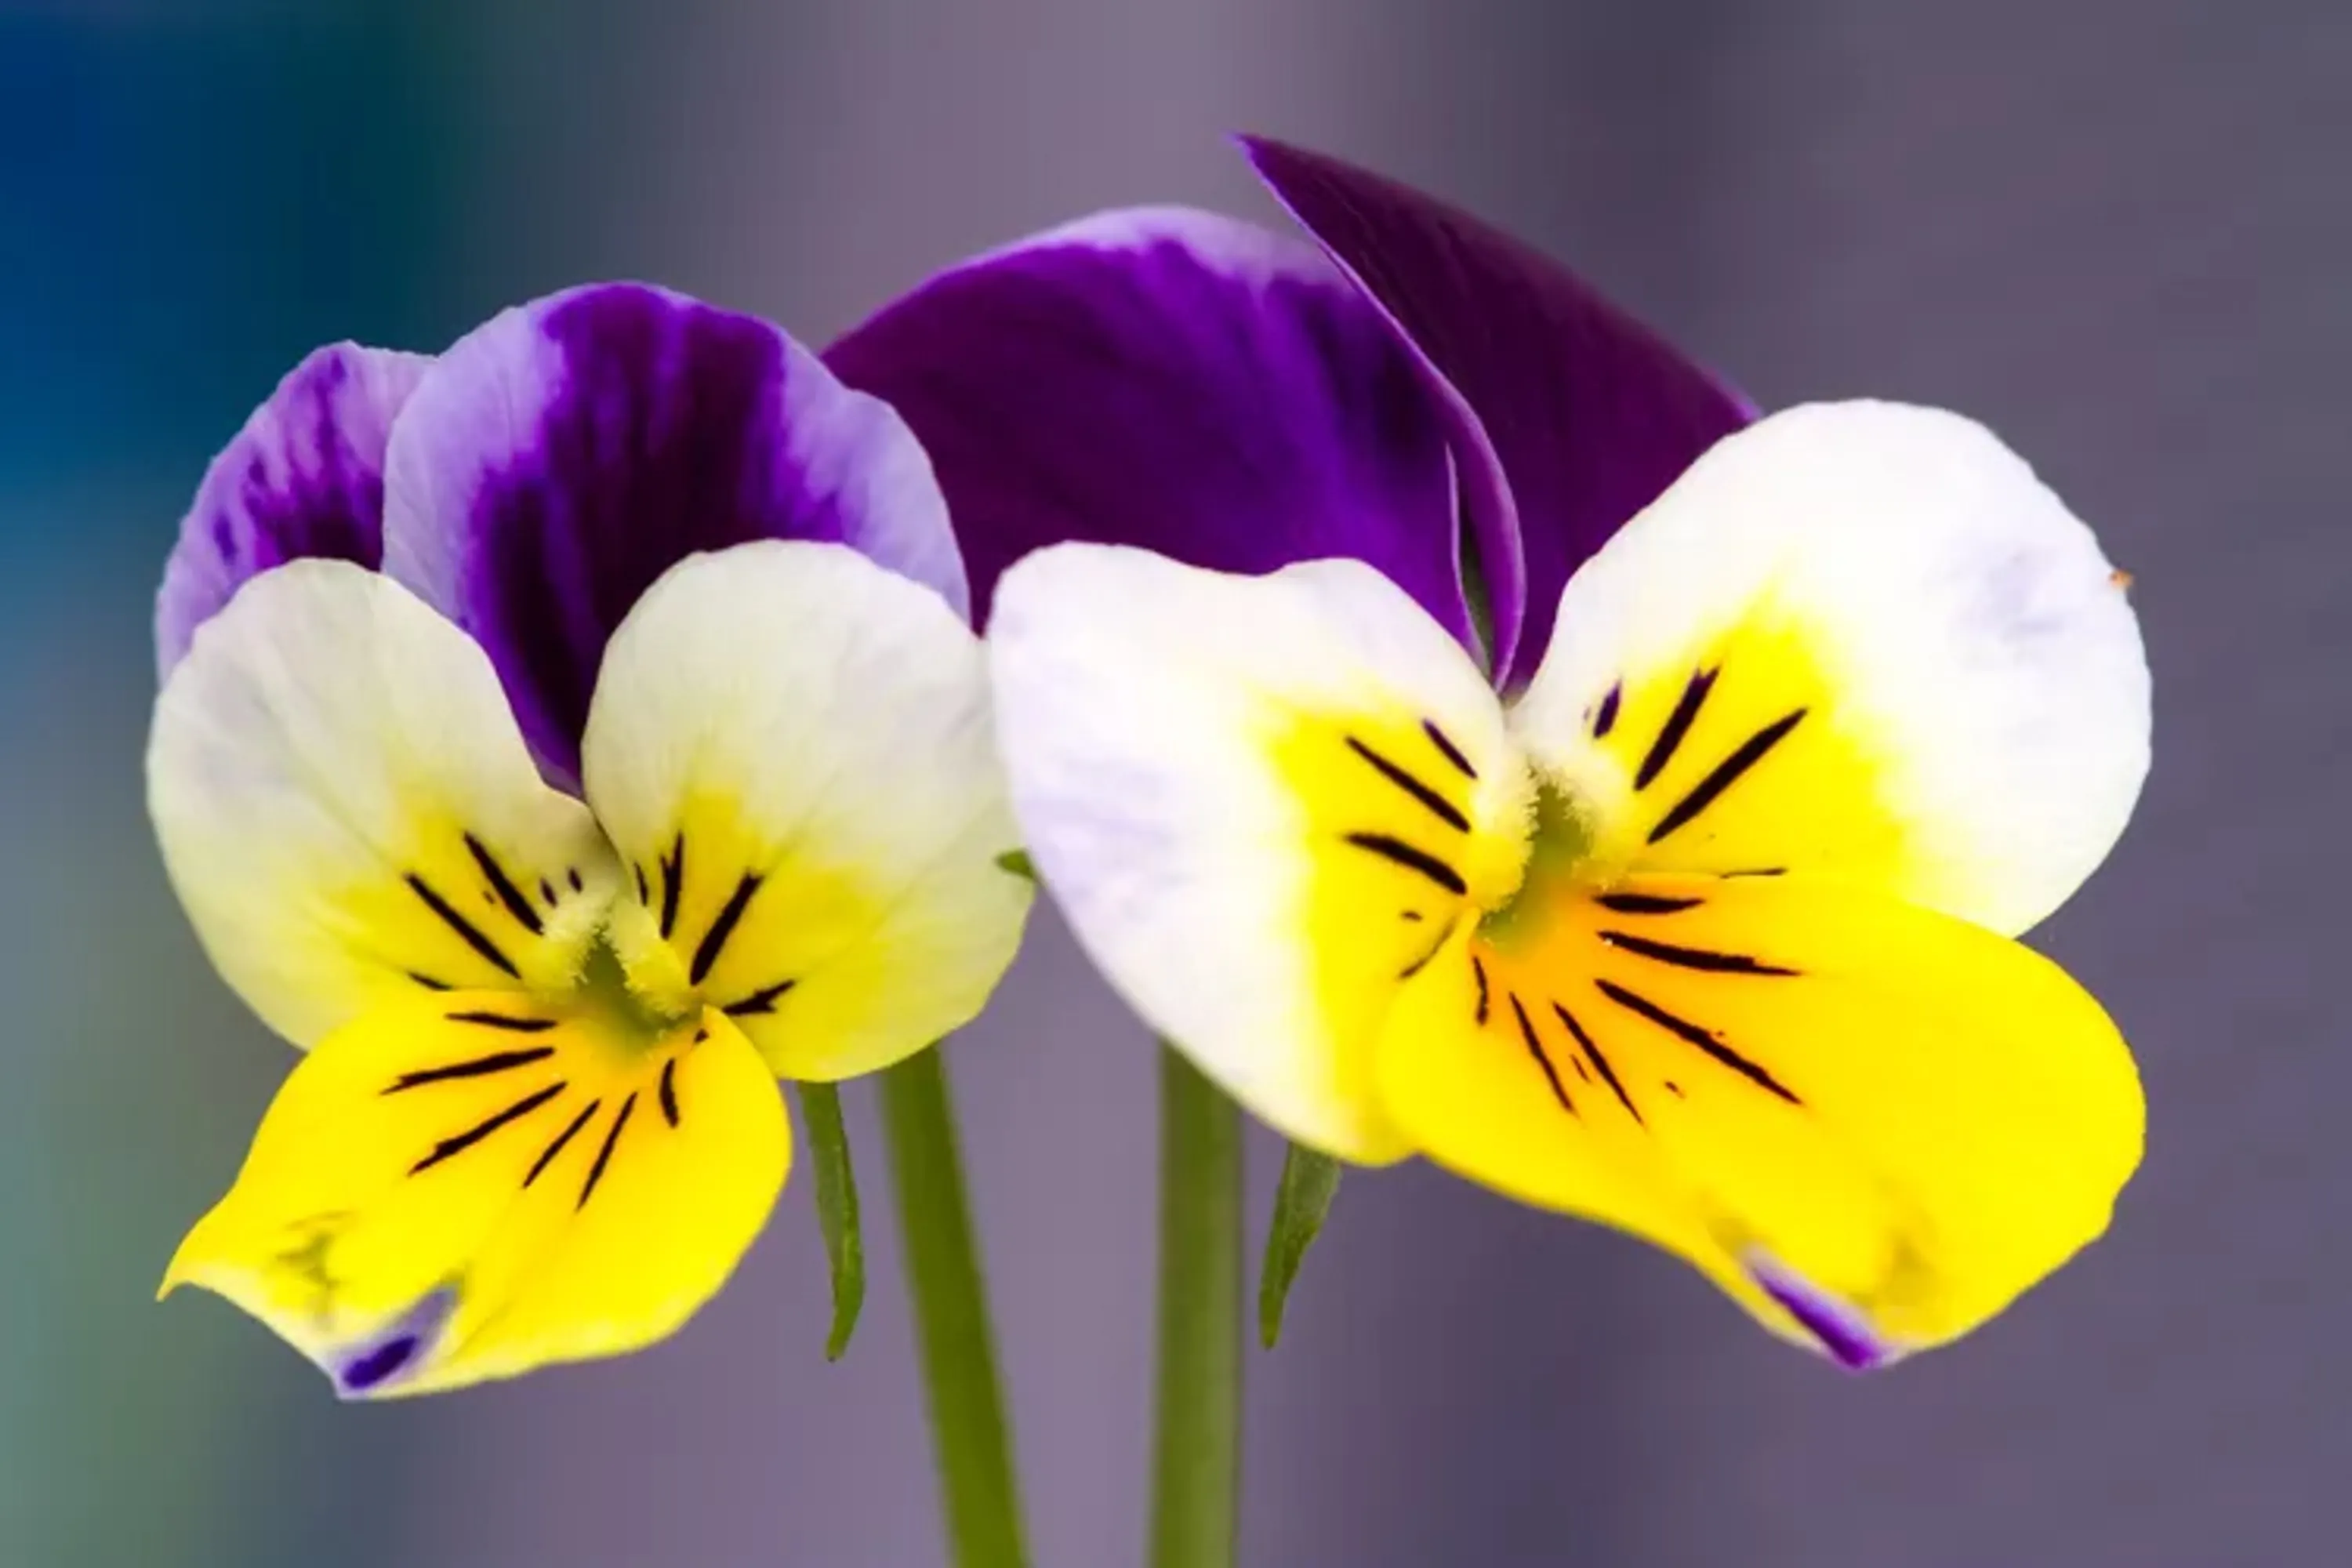 Colorful flowers pansy lead getty 0723 6d21ab3c214140c3851aa05f110b7a6b copy